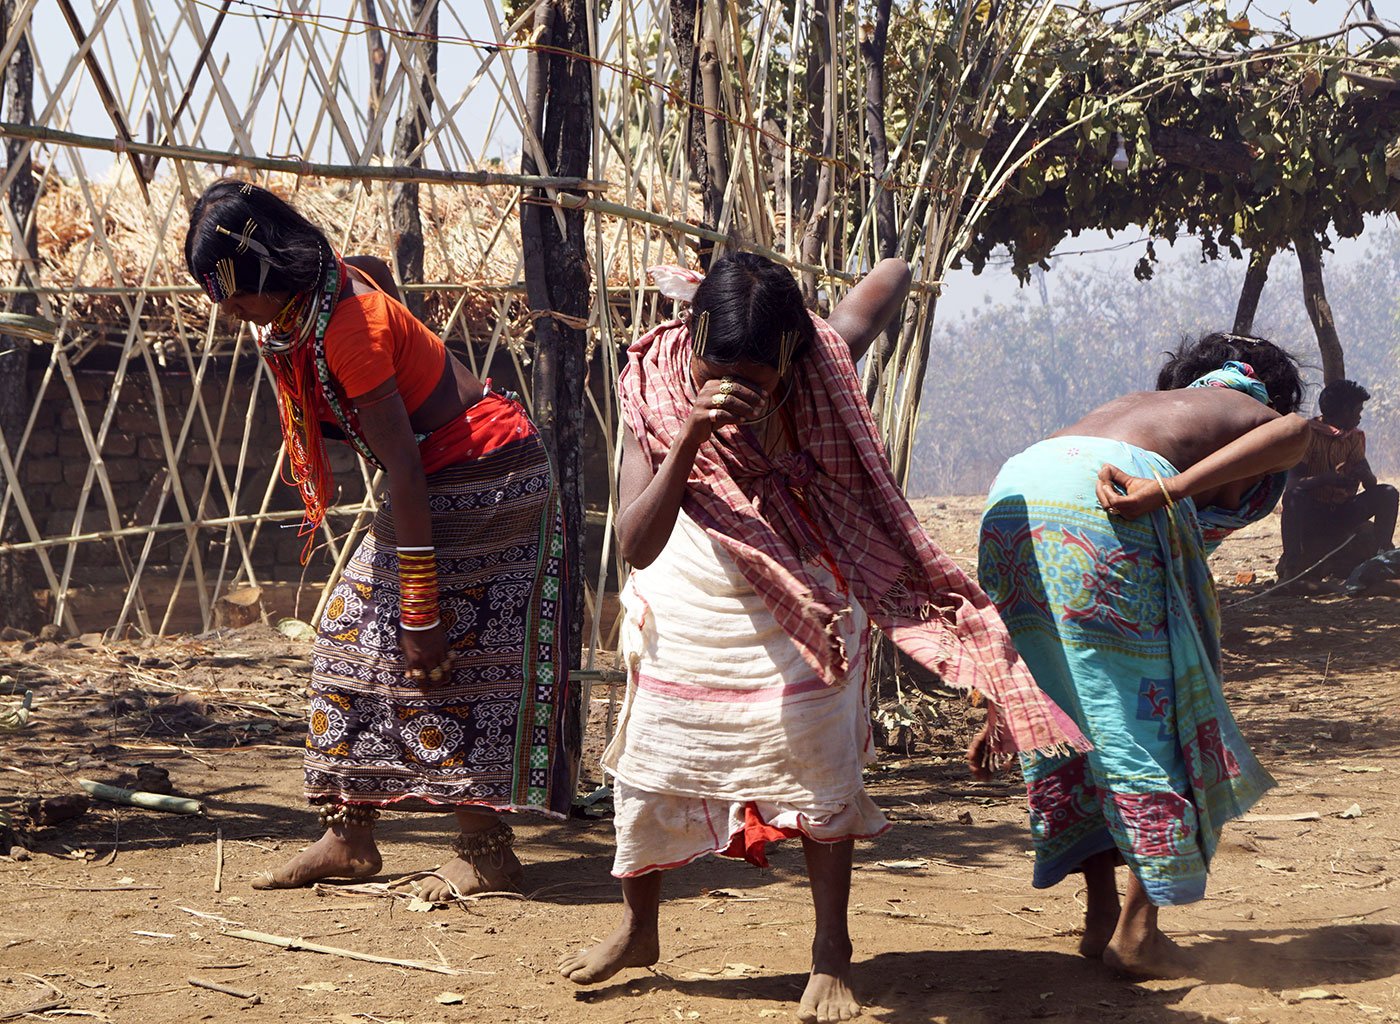 Three tribal women, who are priests, dancing after conducting their rituals